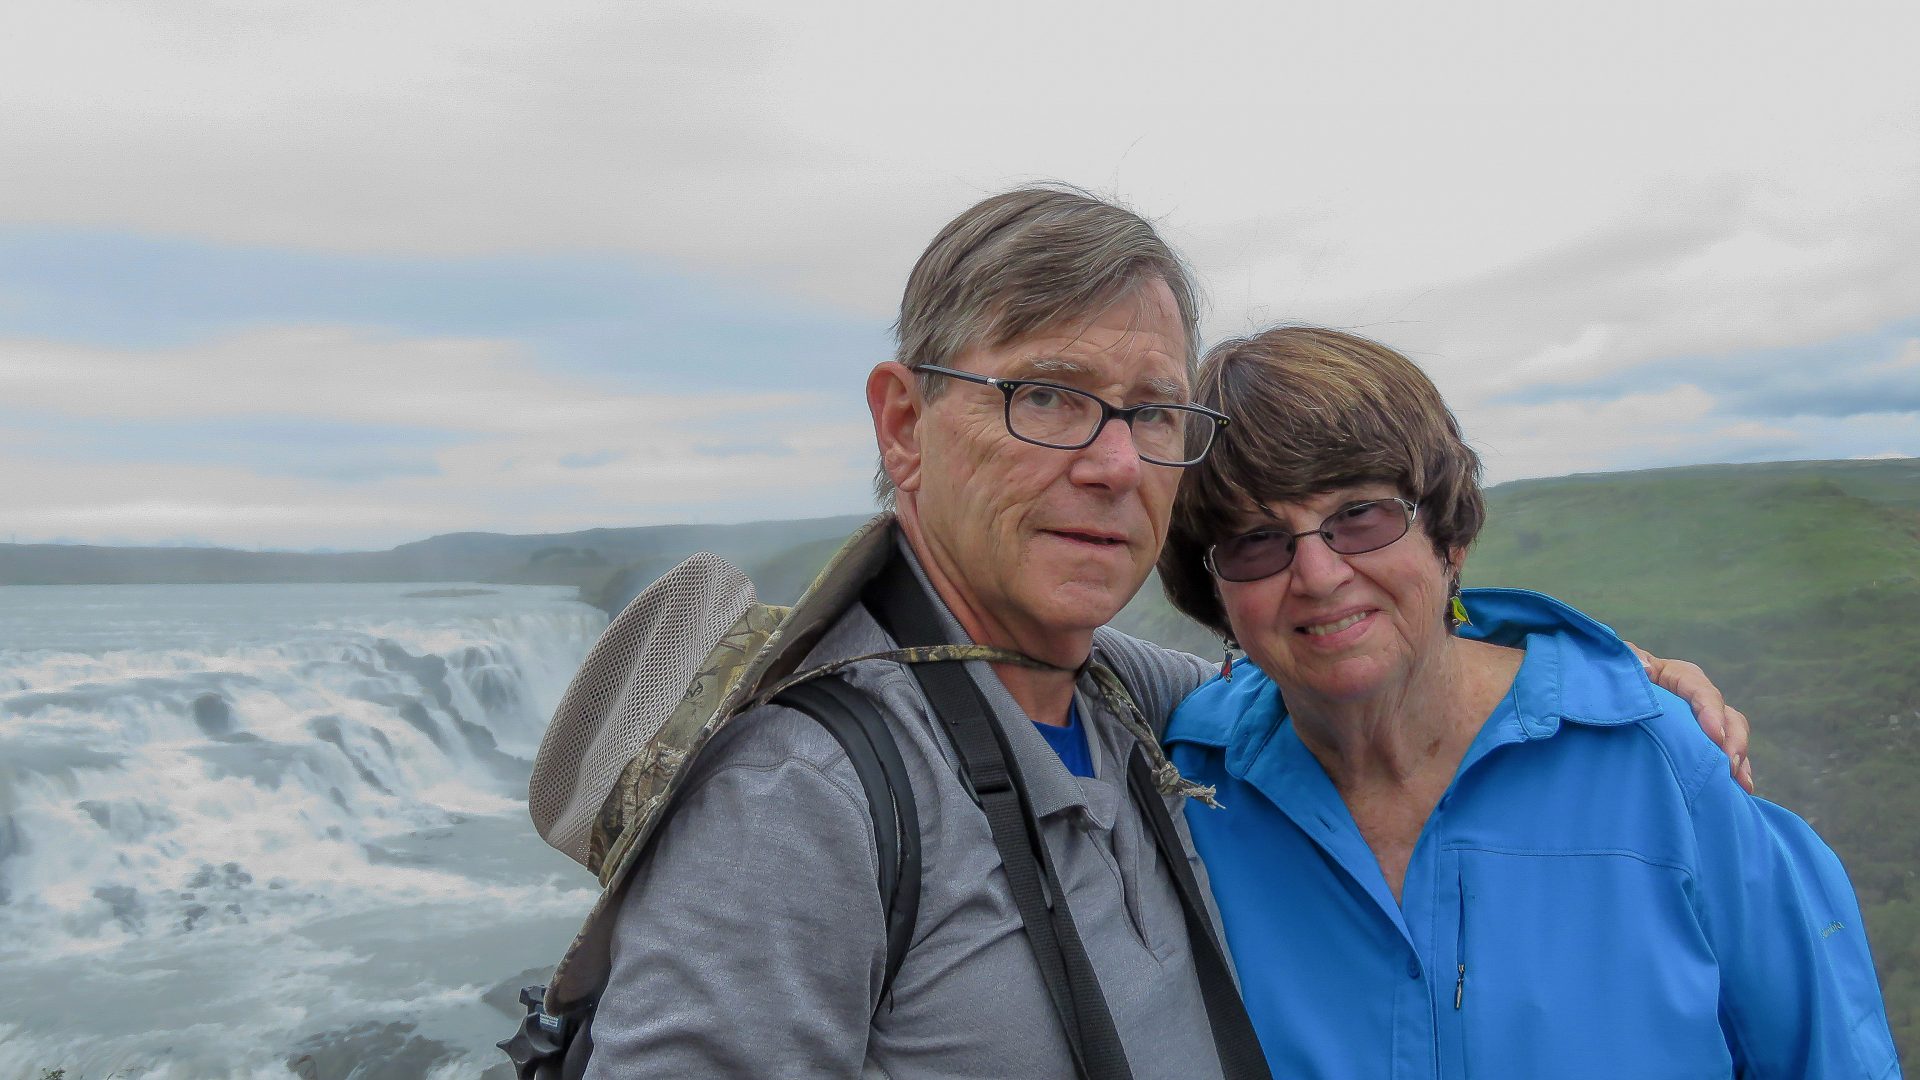 Don and Maureen in front of a large Icelandic waterfalls.